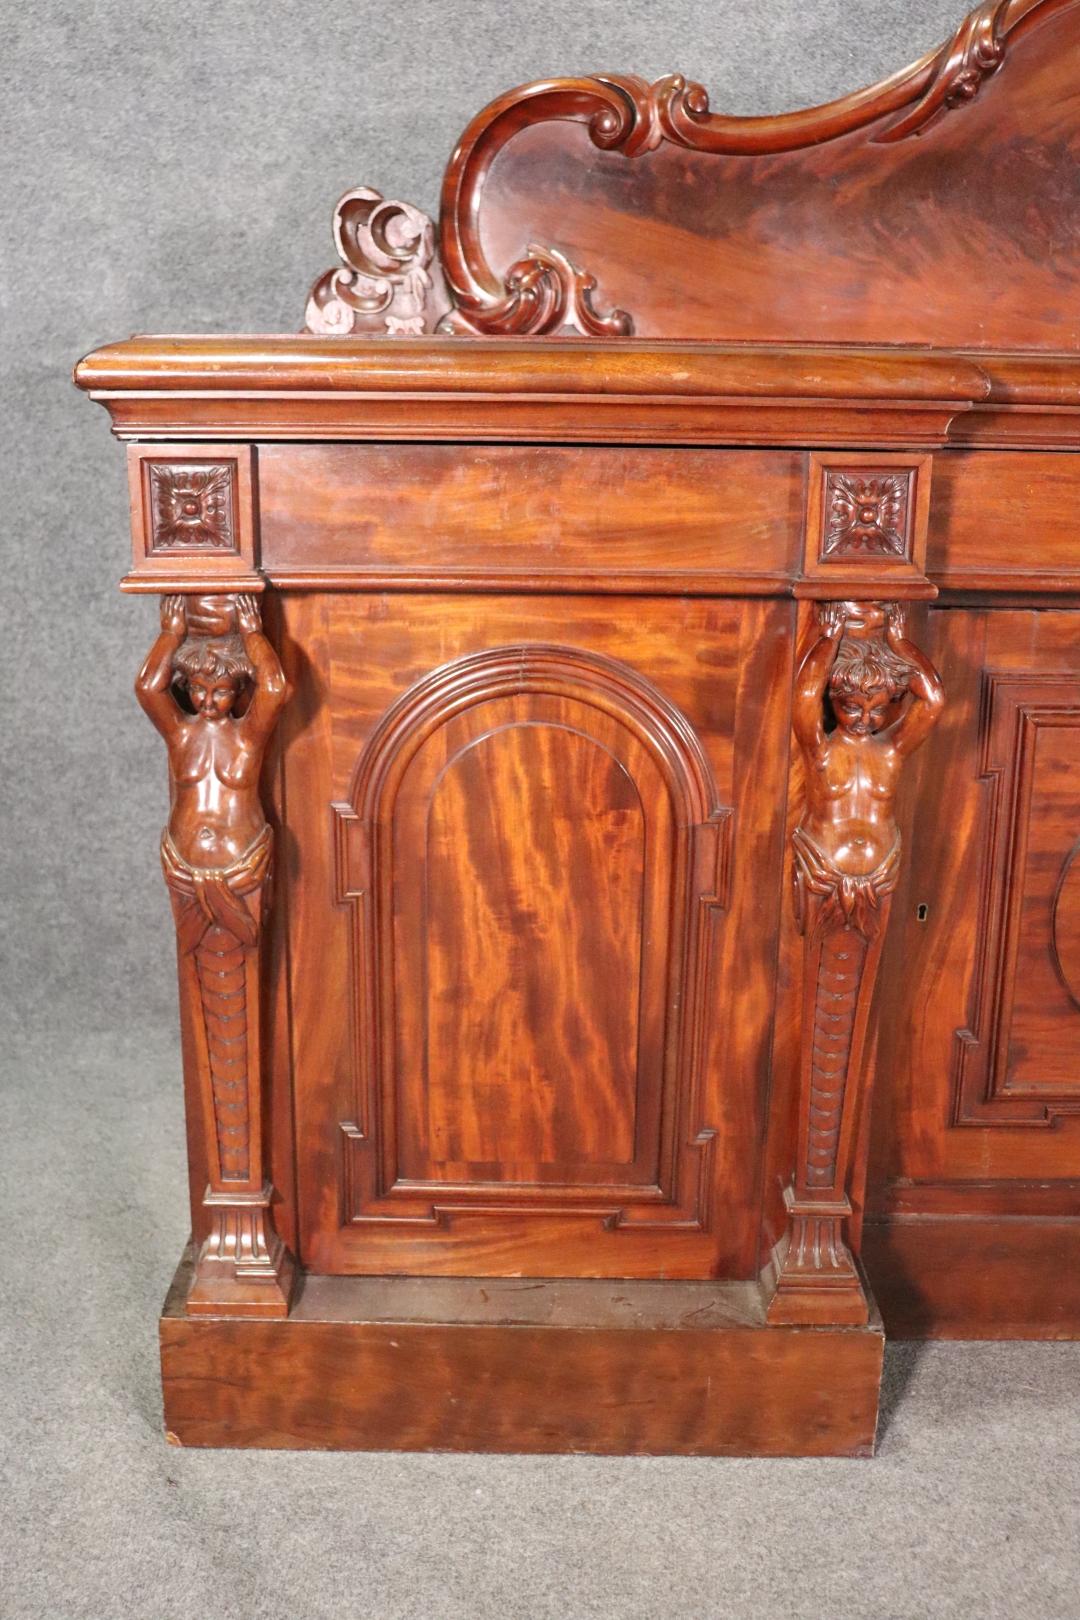 Rare Carved Full Figure Carved Solid Mahogany English Huntboard Sideboard C1870s For Sale 3